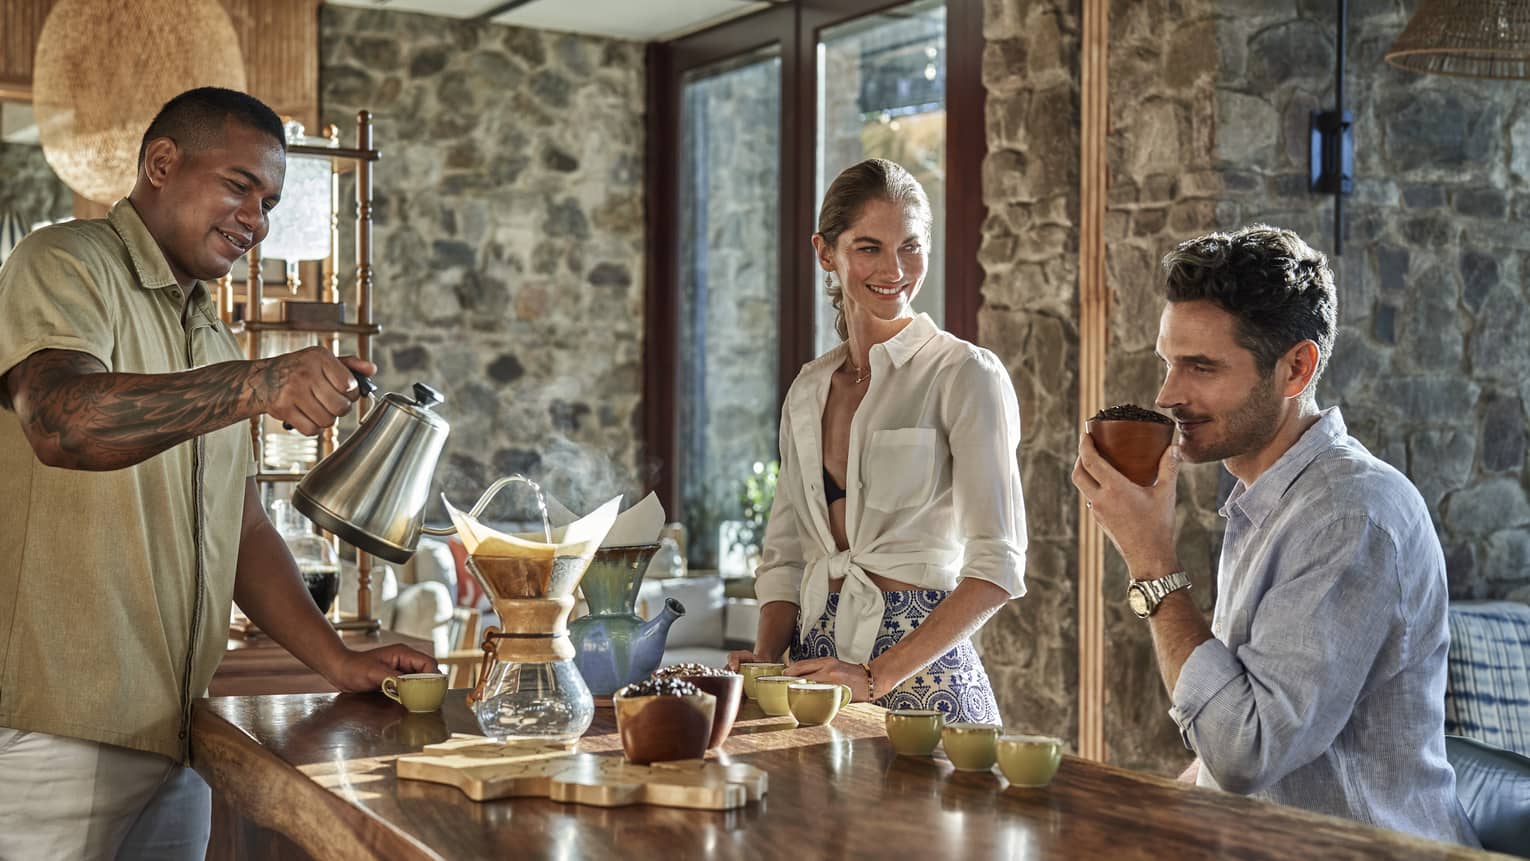 A man sits next to a wooden counter smelling a fresh cup of coffee, a woman stands next to him and another man stand on the opposite side pouring water into a chemex